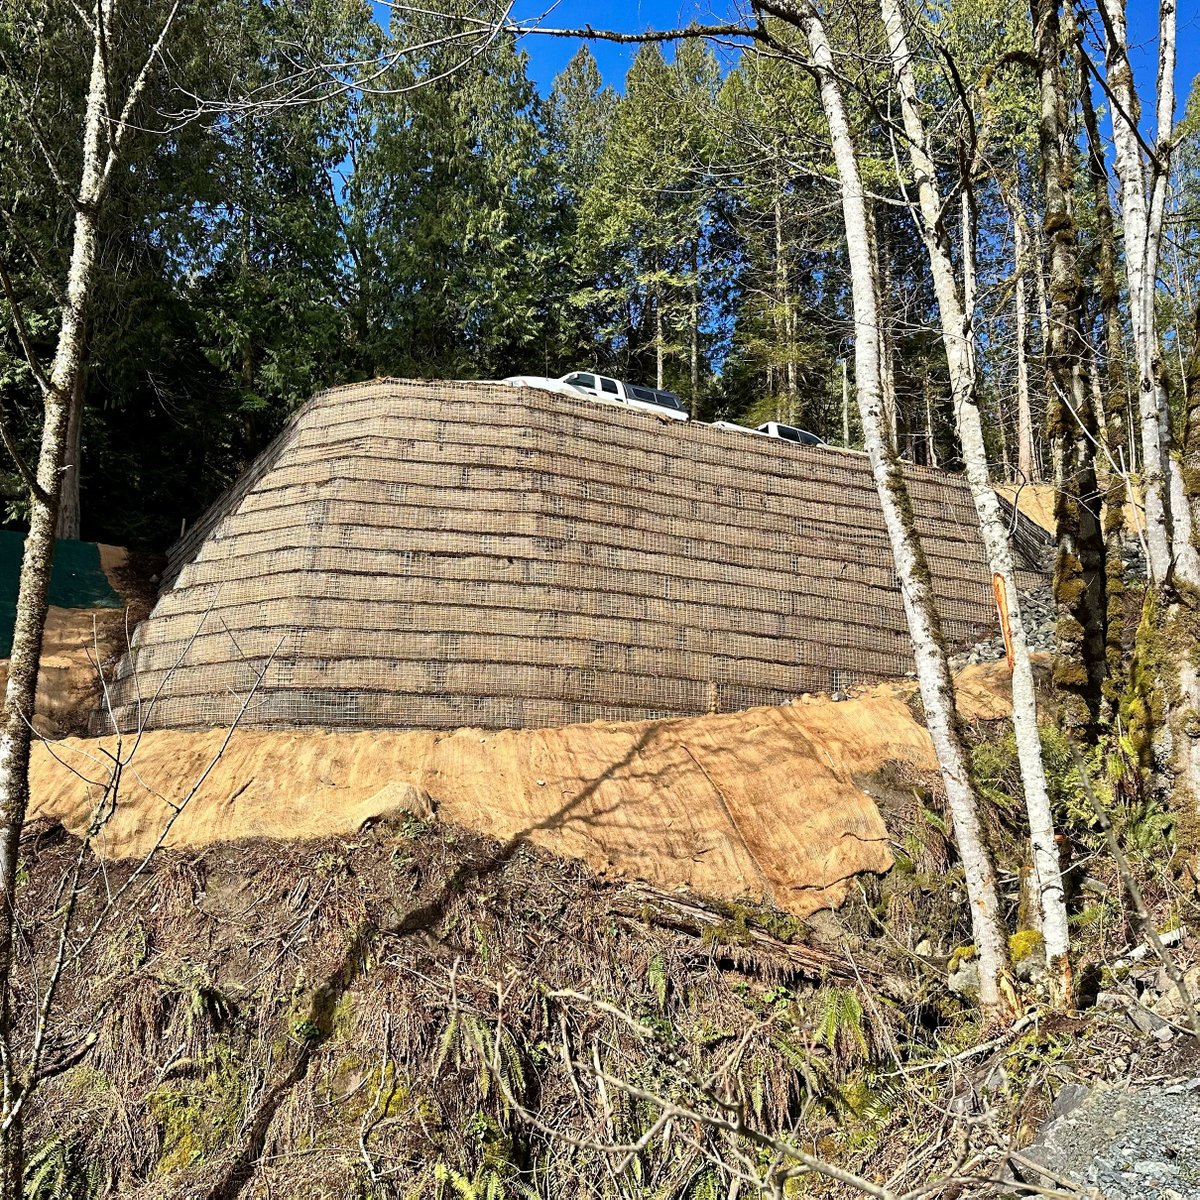 CrossSlope RSS vegetated wire basket slope under construction on Vancouver Island. Cross Country Canada provided the internal design and supply of the RSS for this project. 

#MSE #wallsandslopes #retainingwalls #walldesign #valueengineering #geosynthetics #construction